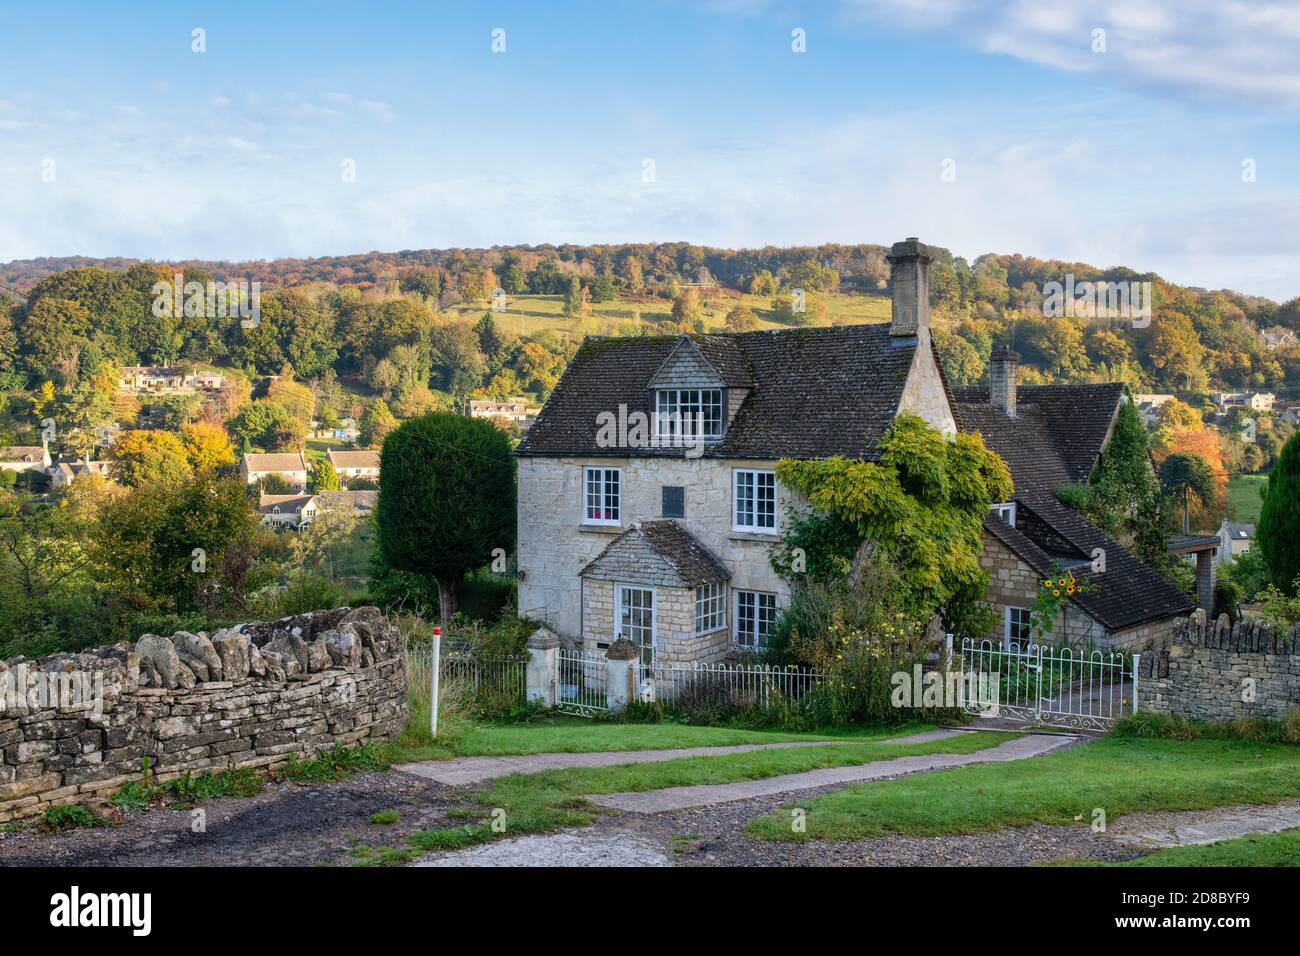 Sheepscombe village in the late afternoon autumn light. Sheepscombe, Cotswolds, Gloucestershire, England Stock Photo